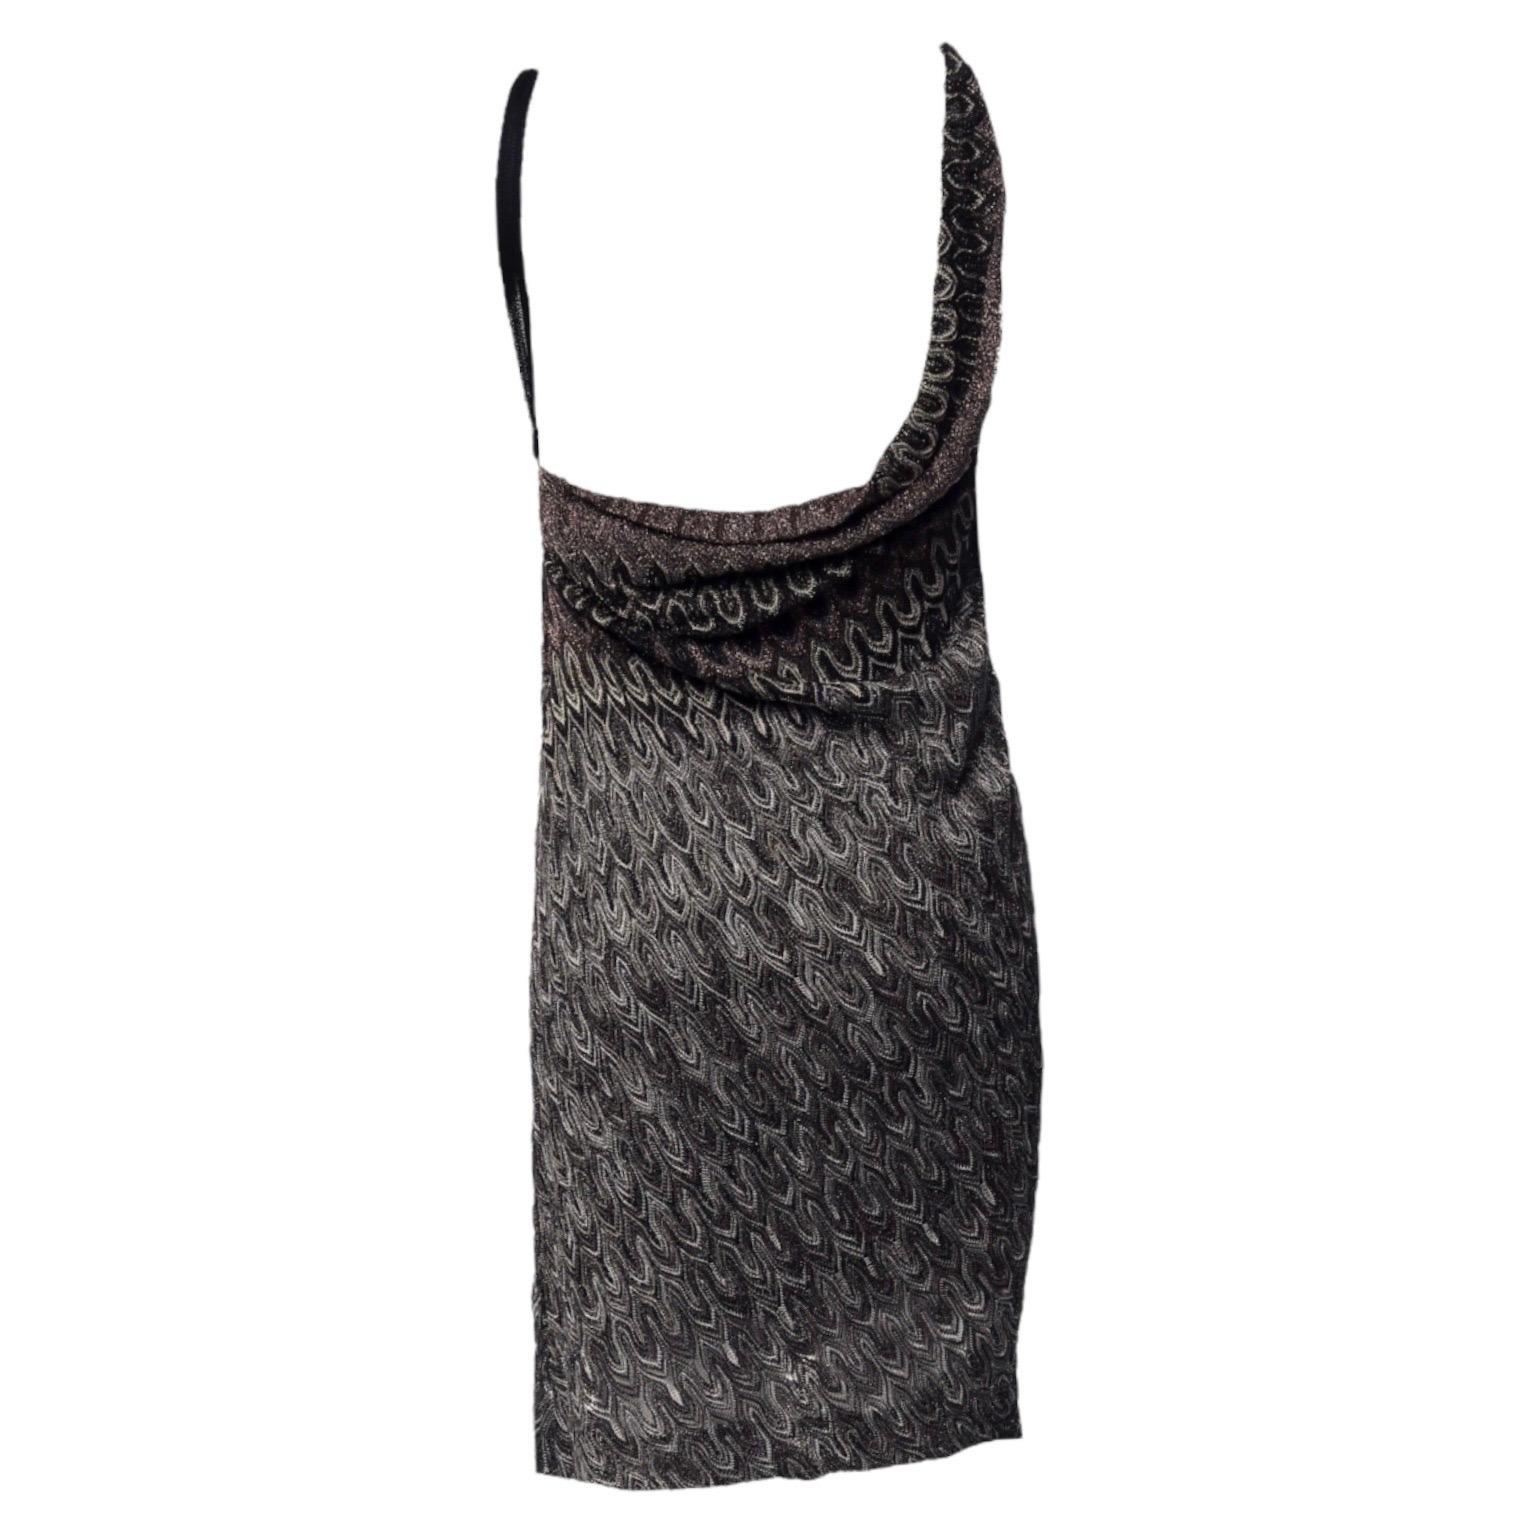 A signature Missoni knit dress in metallic colors is the only dress you'll need. Missoni's dress is an effortless way to wear the brand's signature crochet knit. 

Cut a stylish silhouette in Missoni's multicolored Lurex-knit dress with draped